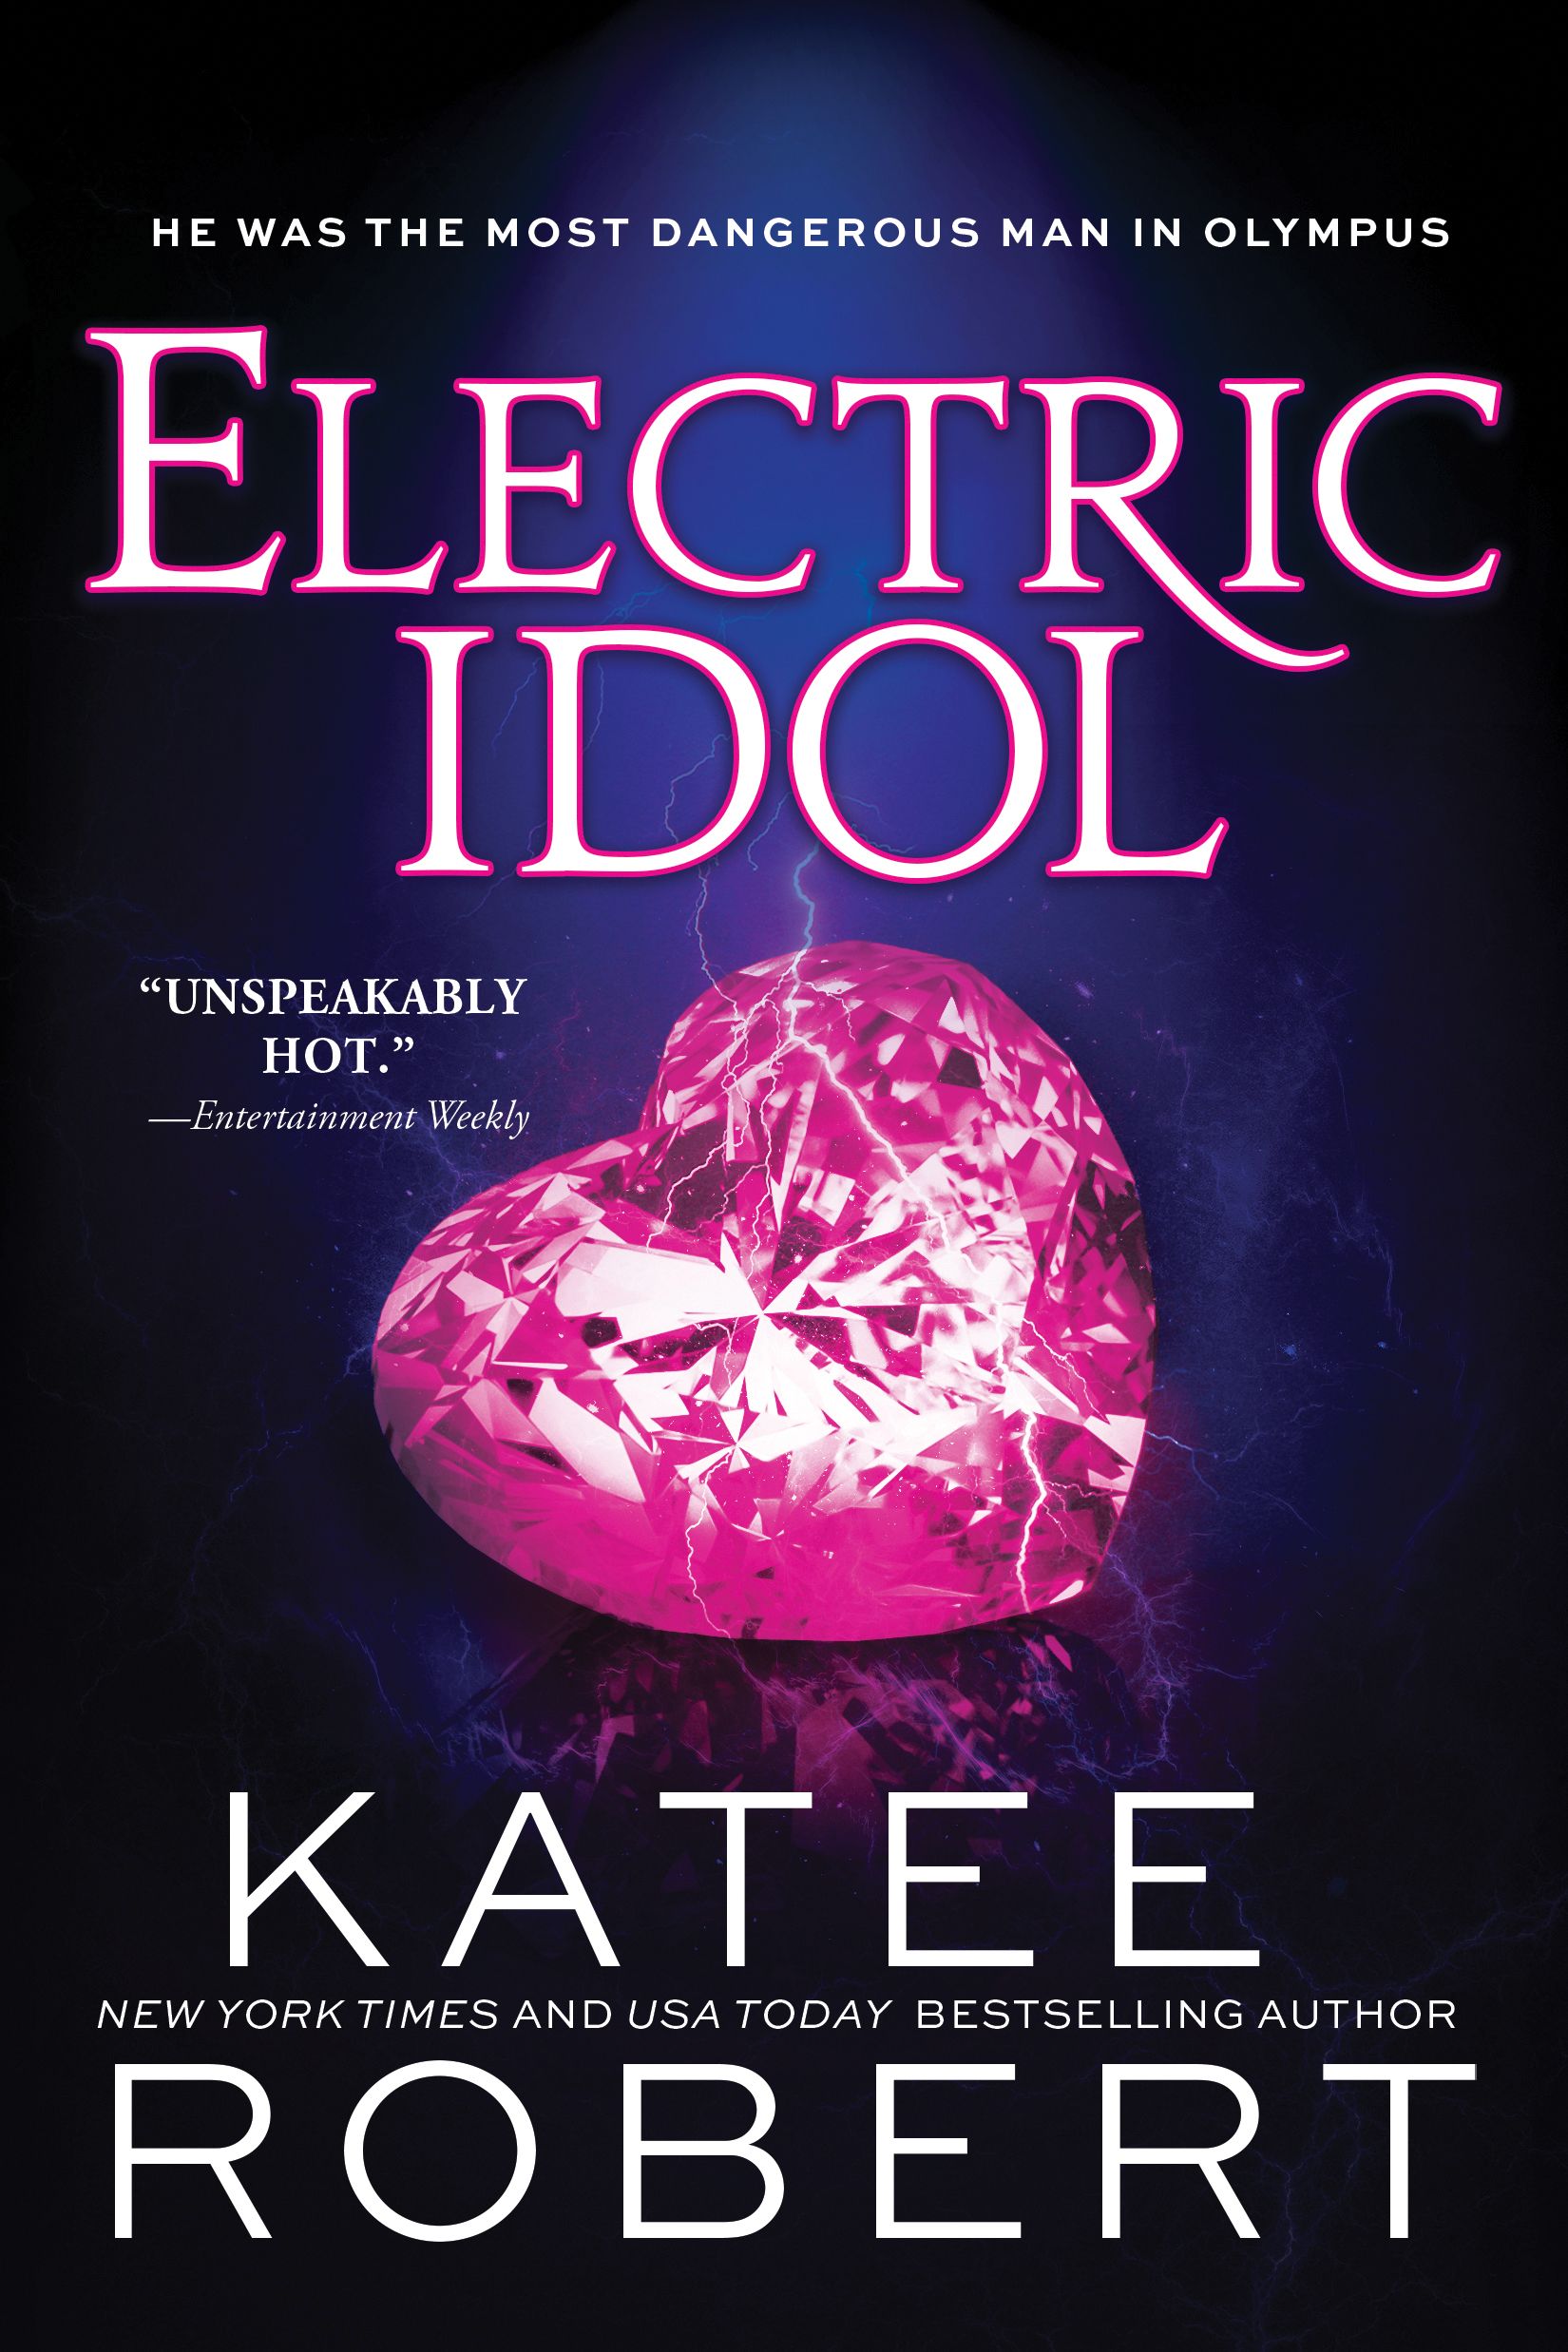 cover of electric idol by katee robert